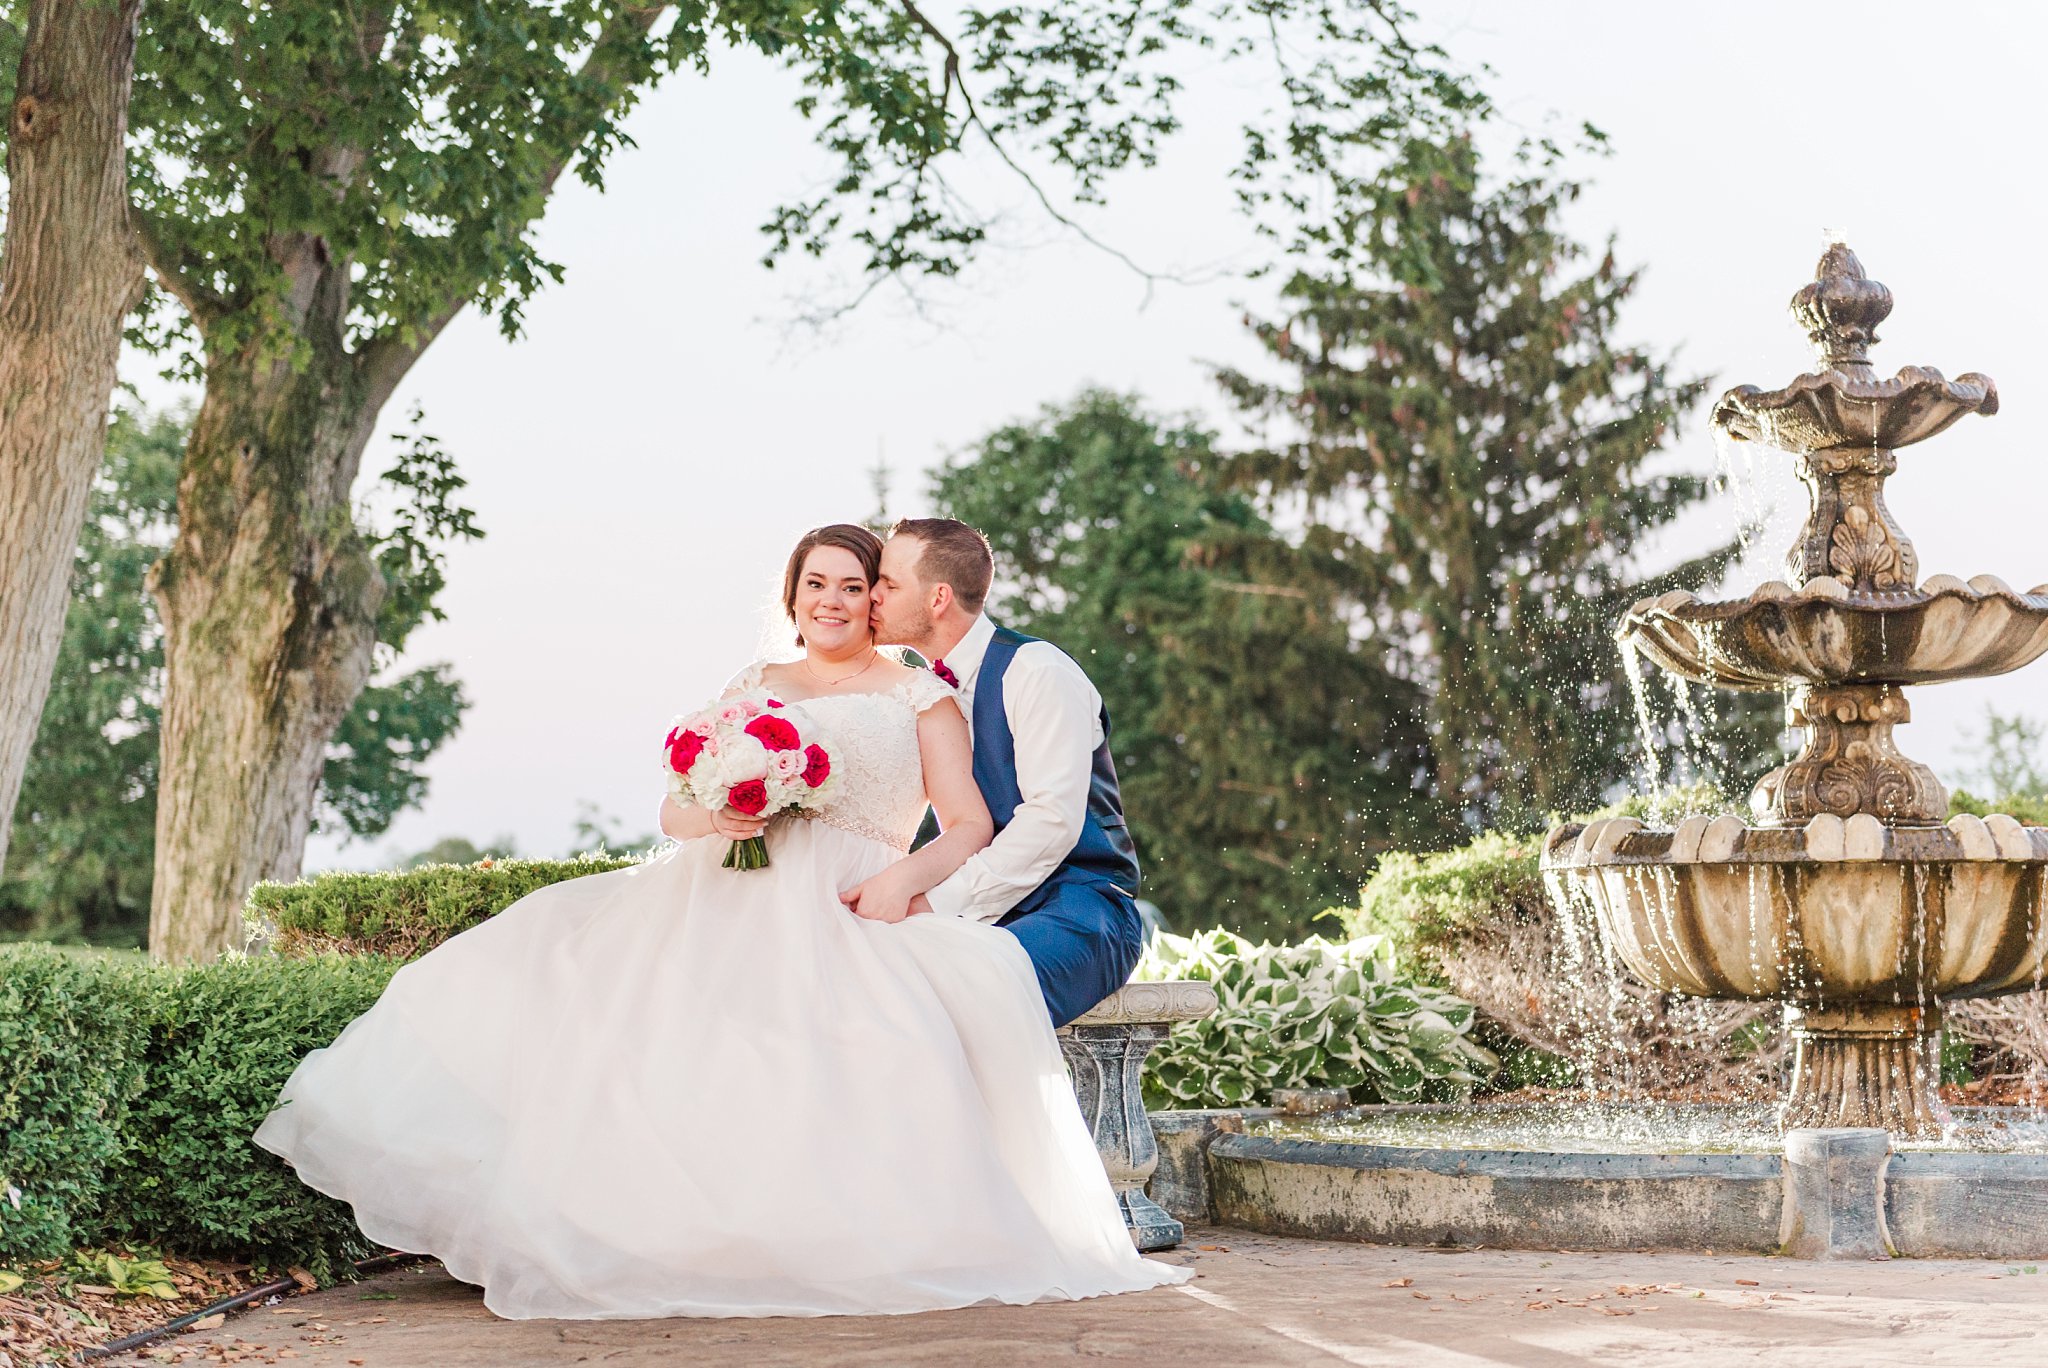 a man and woman sit on a bench beside a stone fountain. image is used in a blog post sharing business tips for wedding photographers